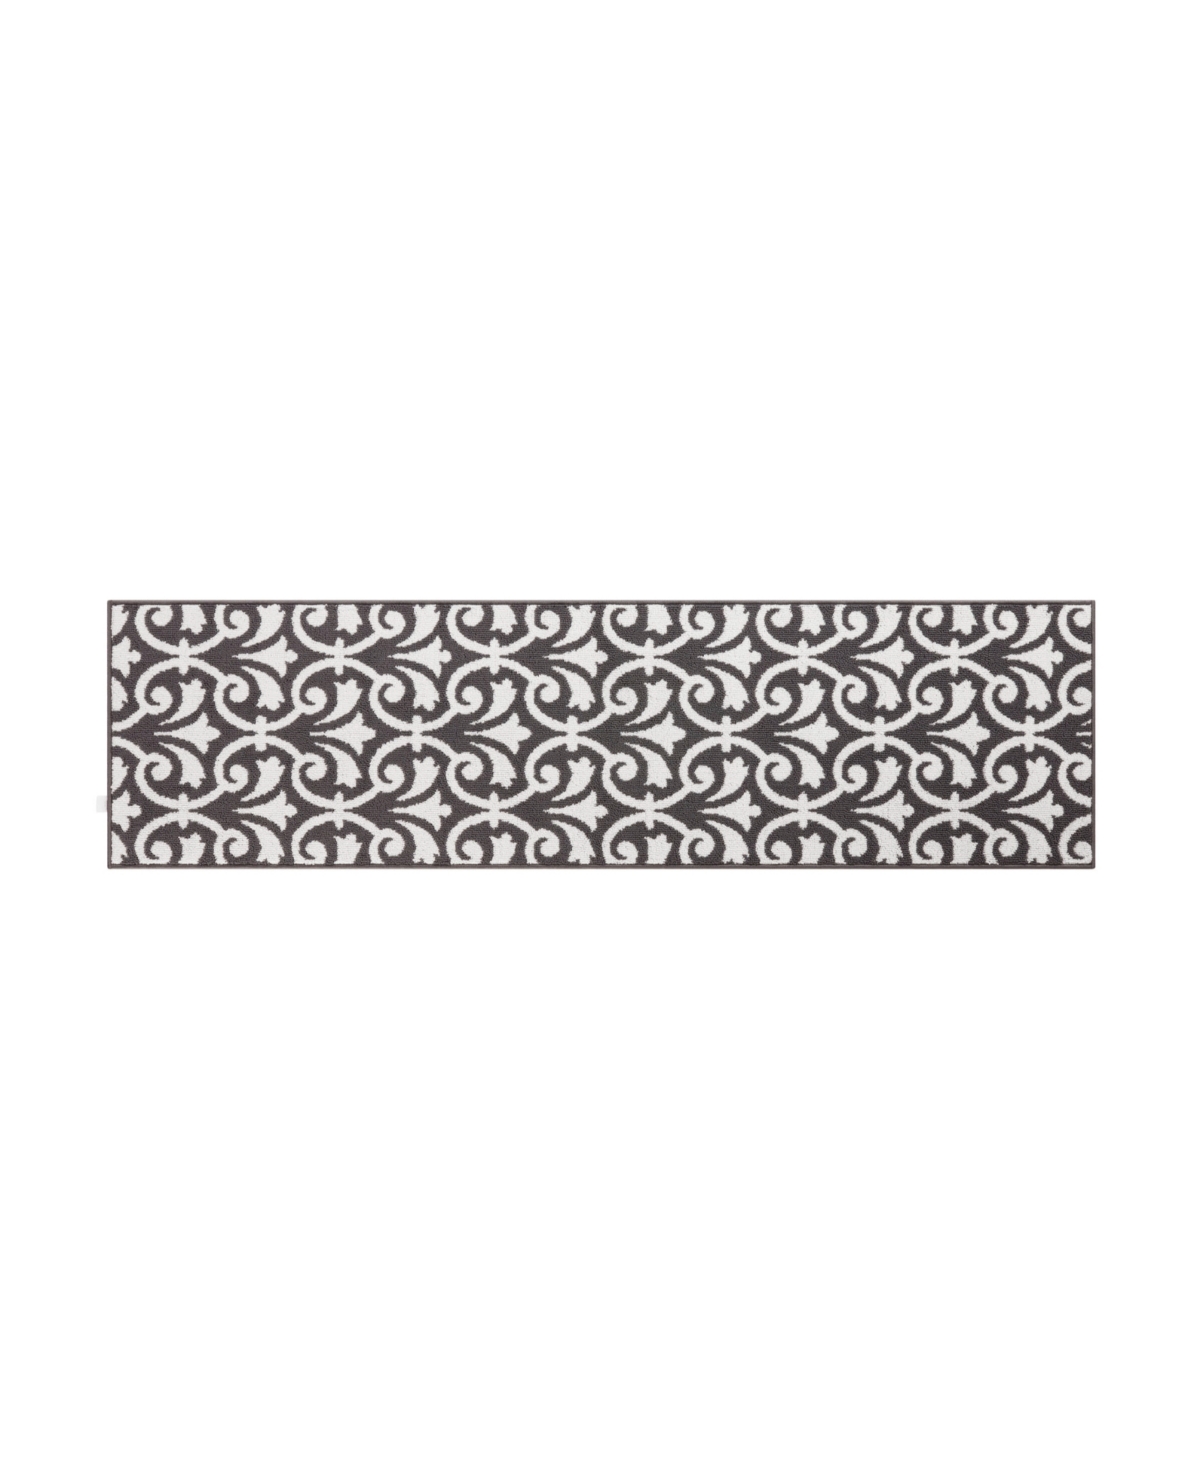 Jean Pierre Karb Floral Scroll Tufted In Dark Gray And White